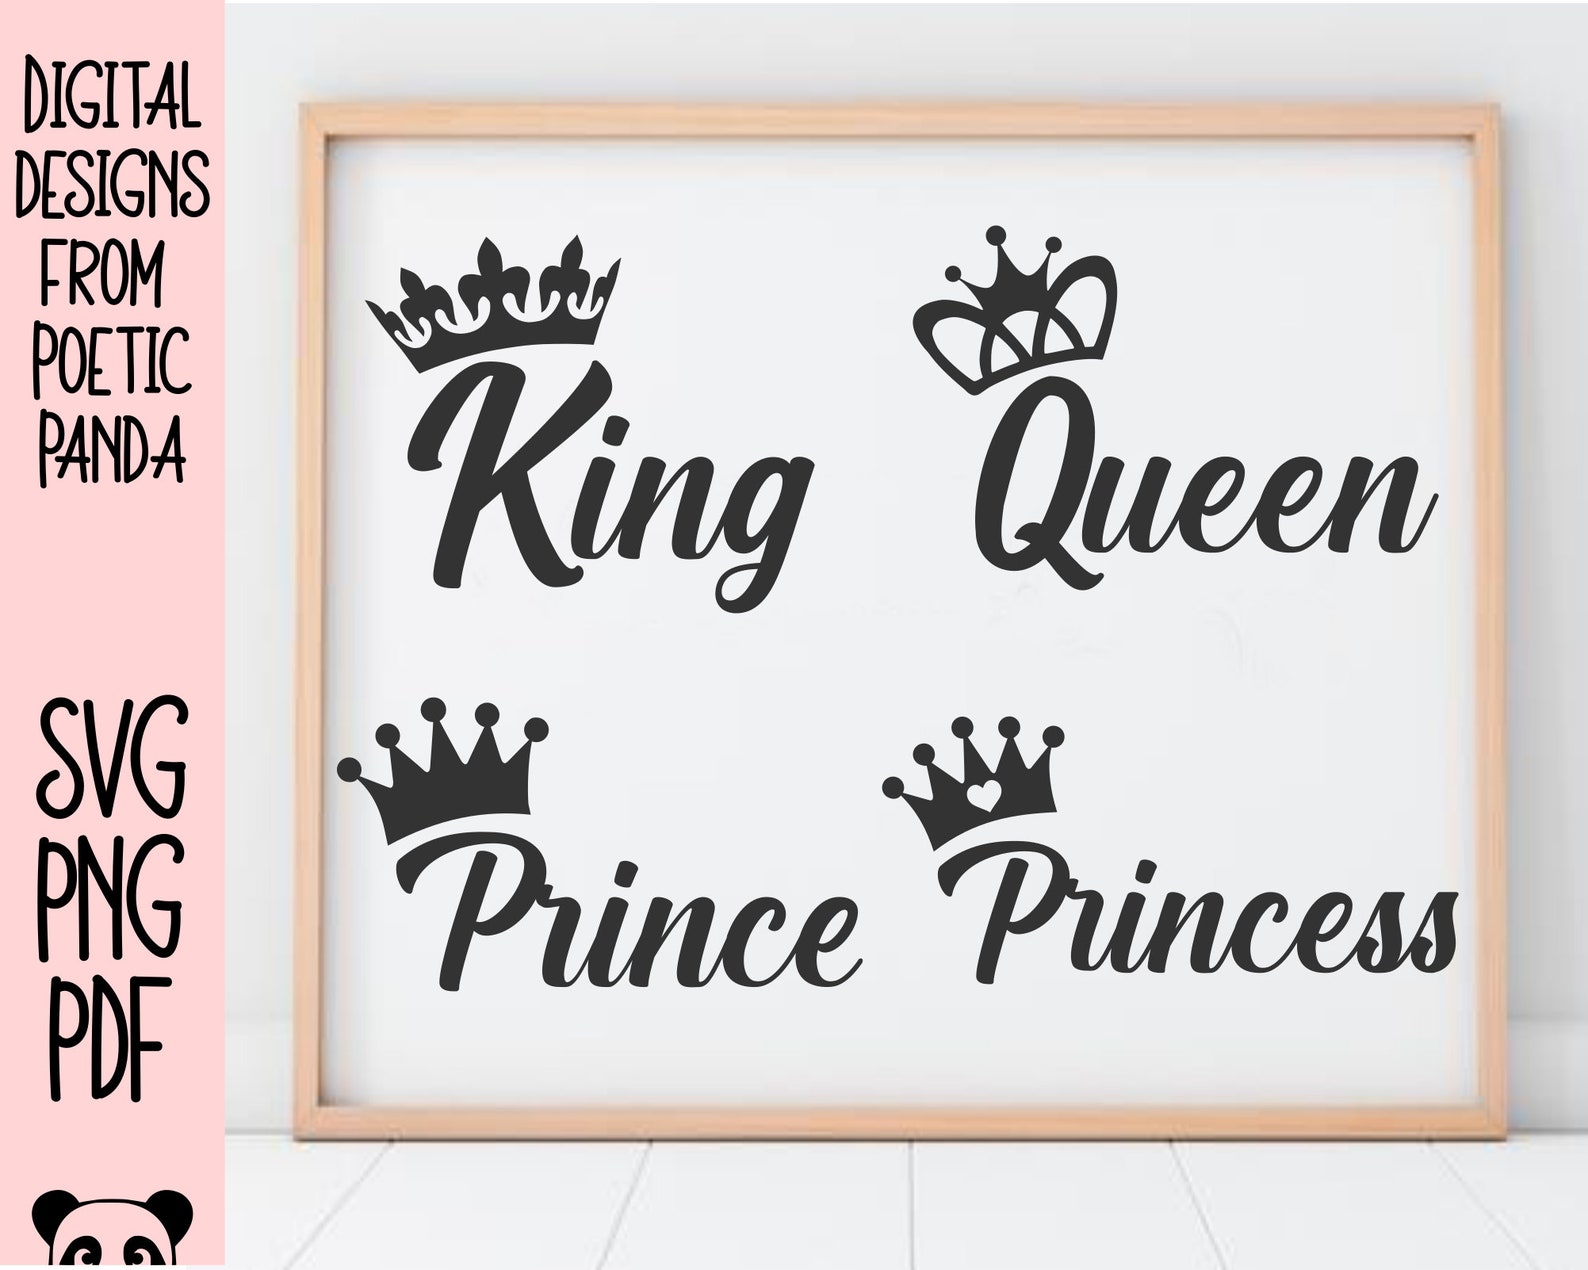 King Queen Prince Princess Svg Png Pdf Queen With Crown Etsy